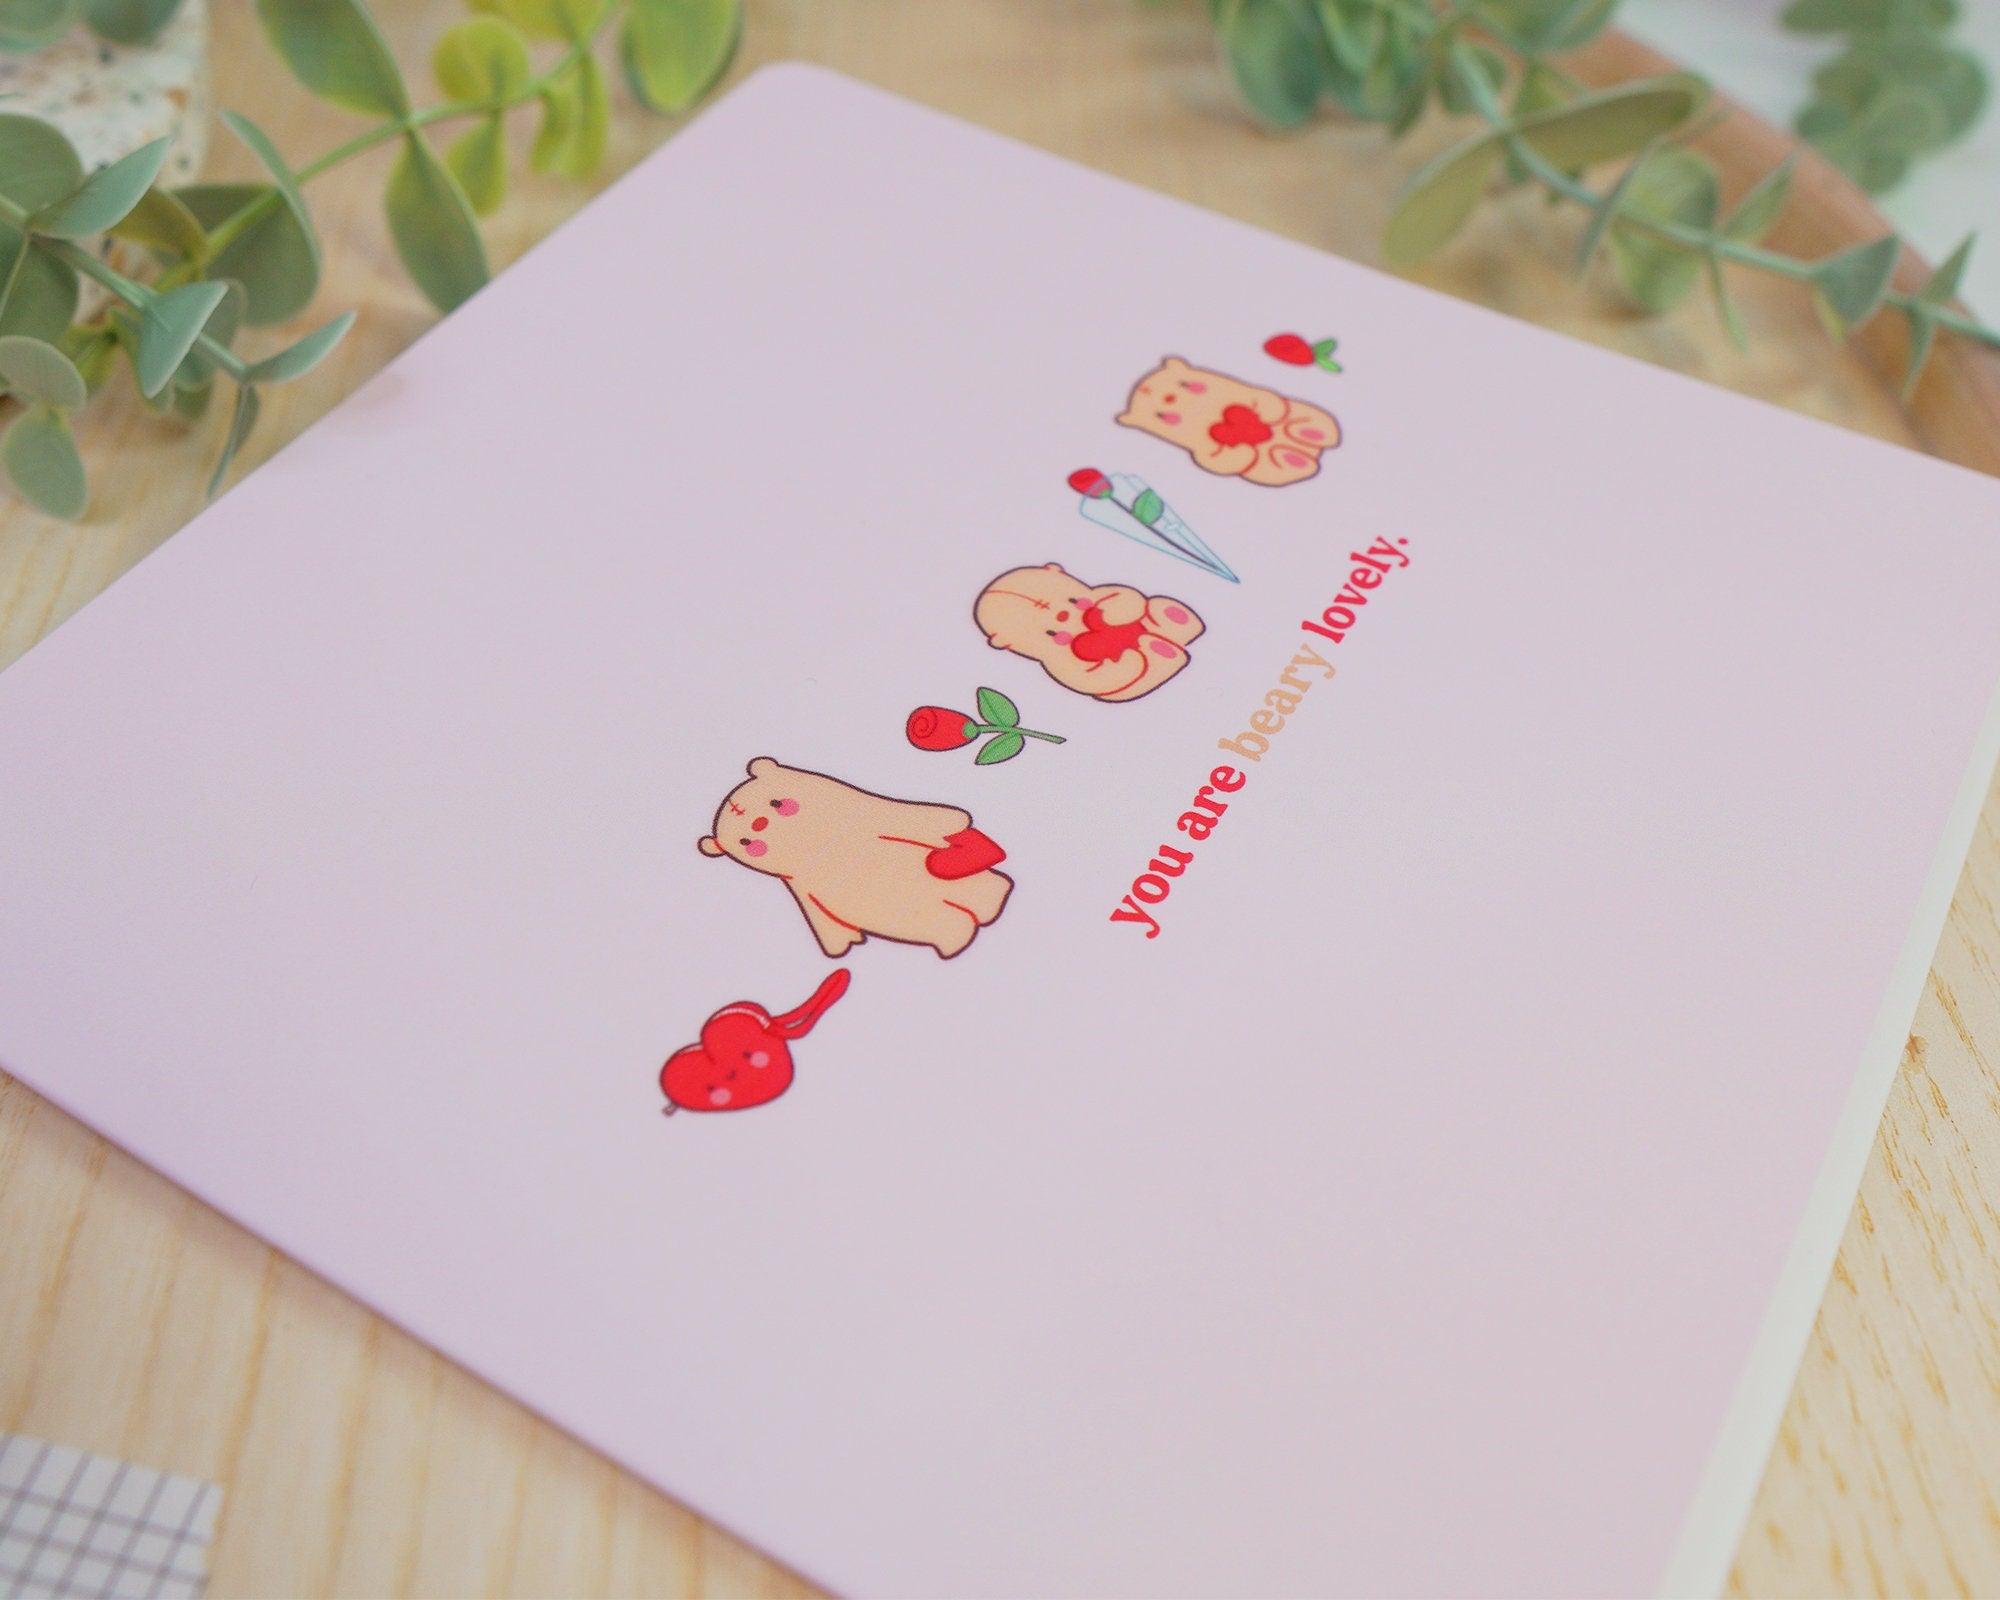 You are Beary Lovely Greetings Card - Katnipp Illustrations